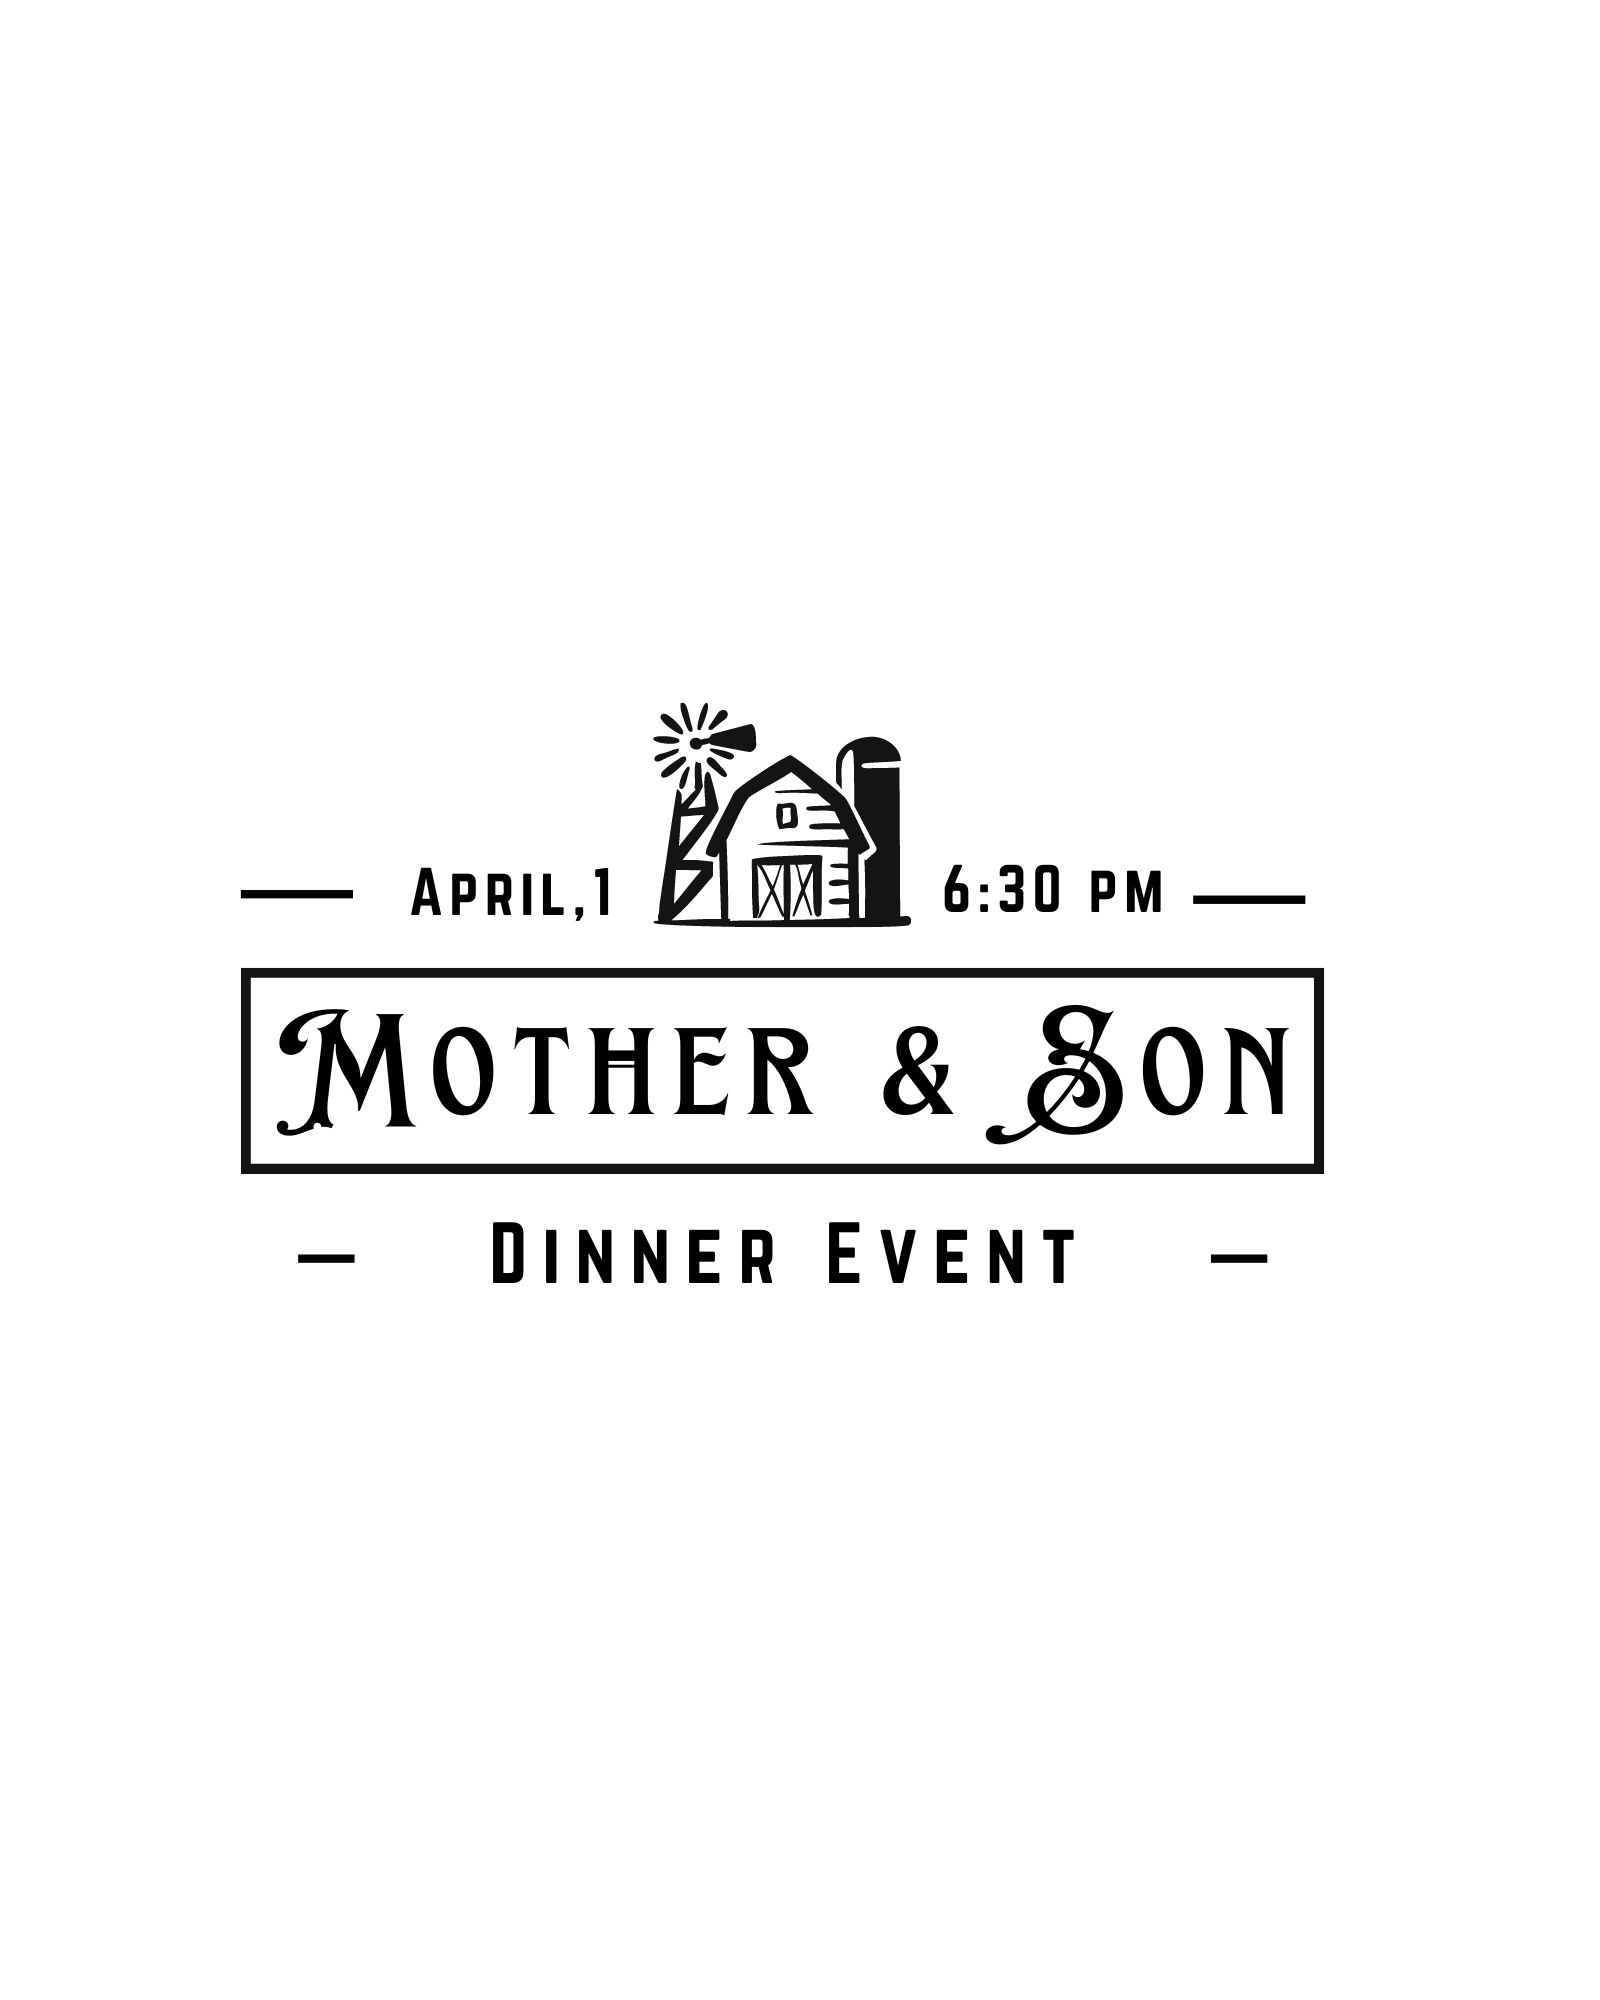 Mother & Son Event Logo (8 × 10 in)